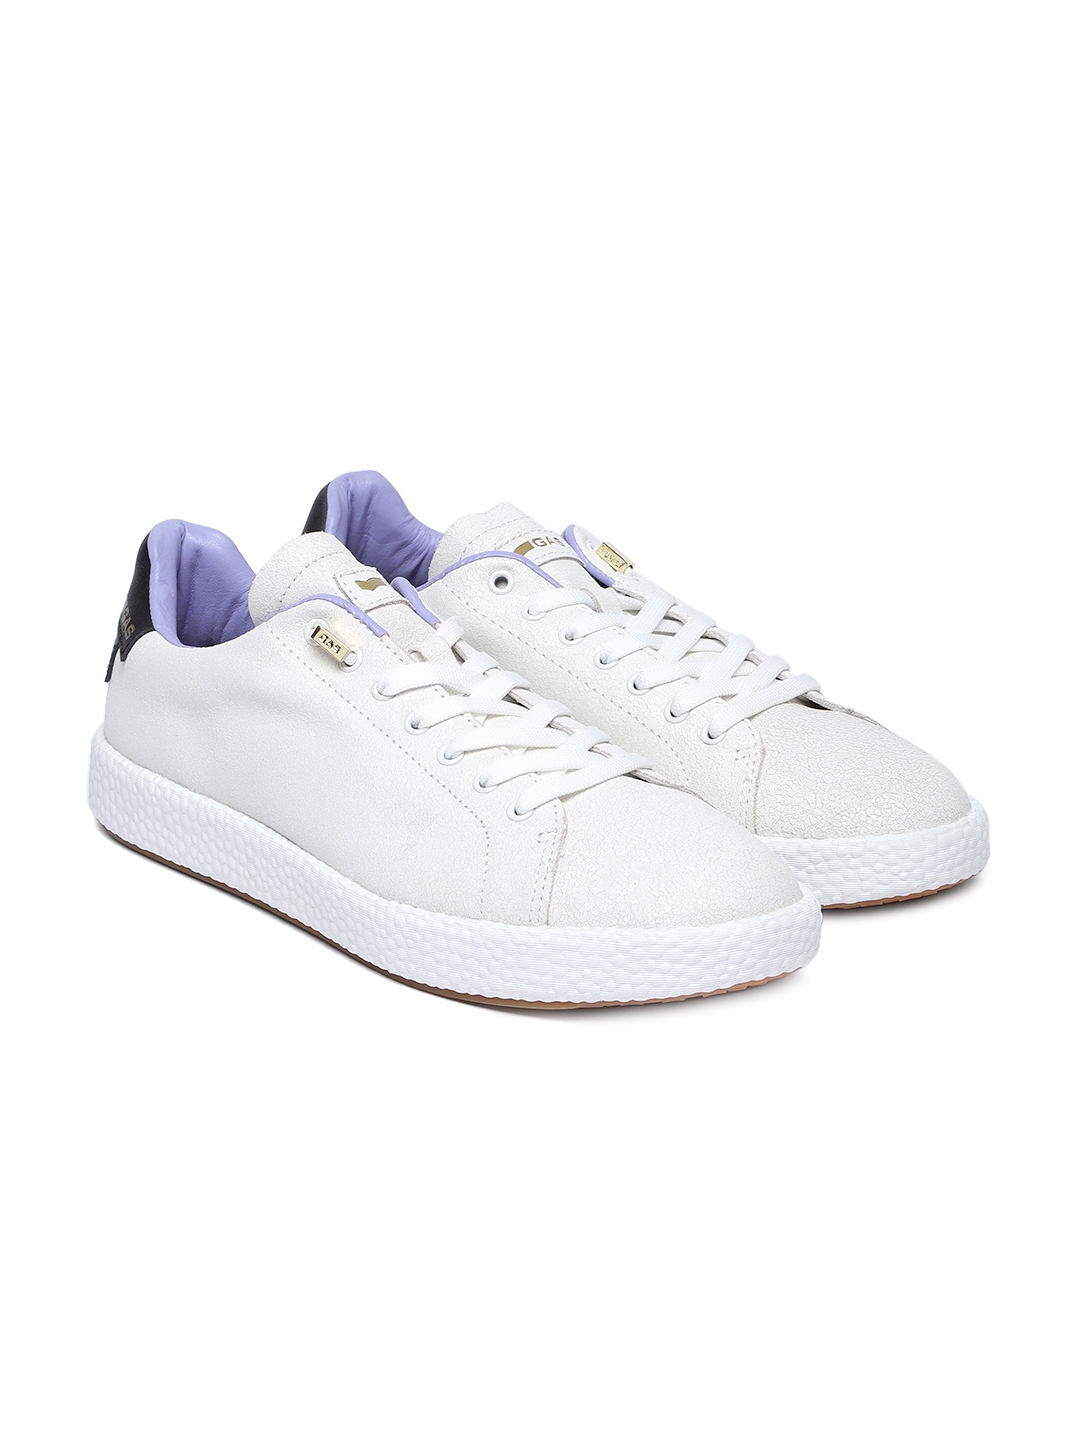 mens white leather tennis shoes